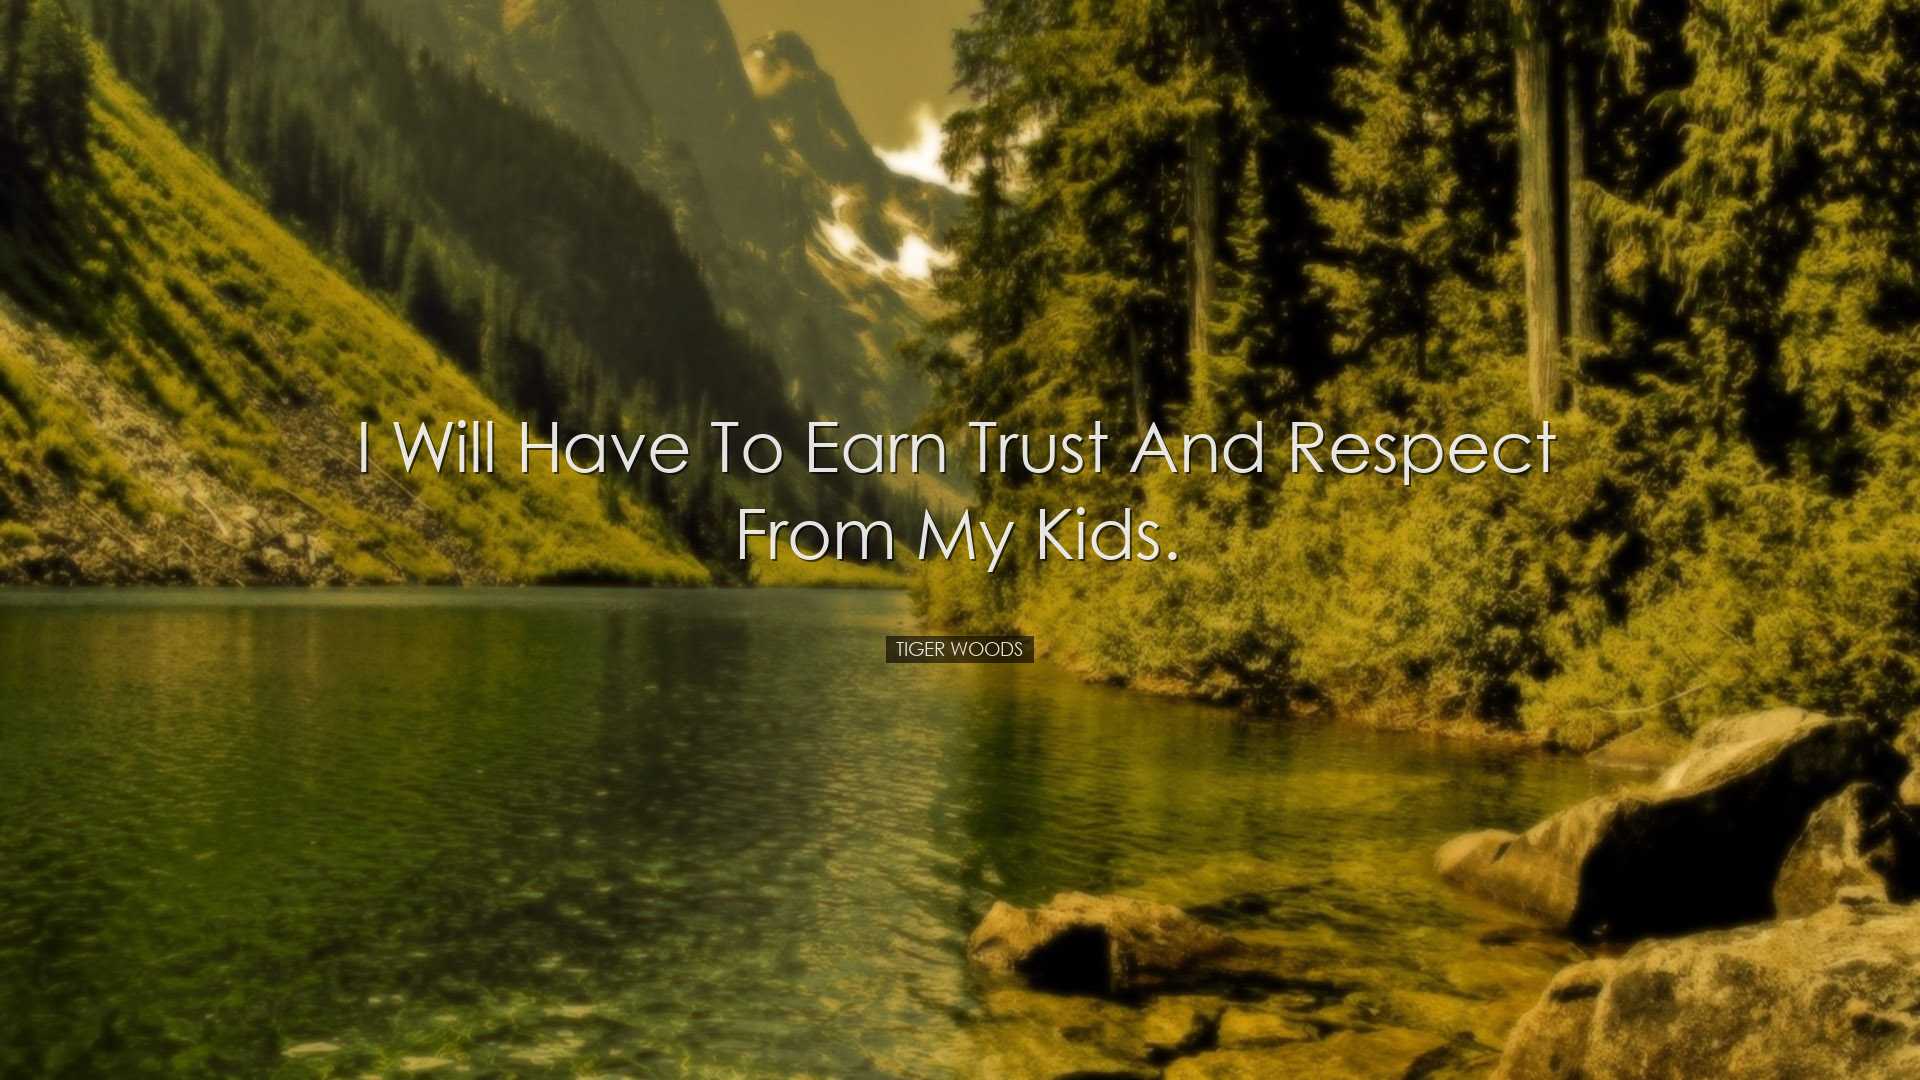 I will have to earn trust and respect from my kids. - Tiger Woods